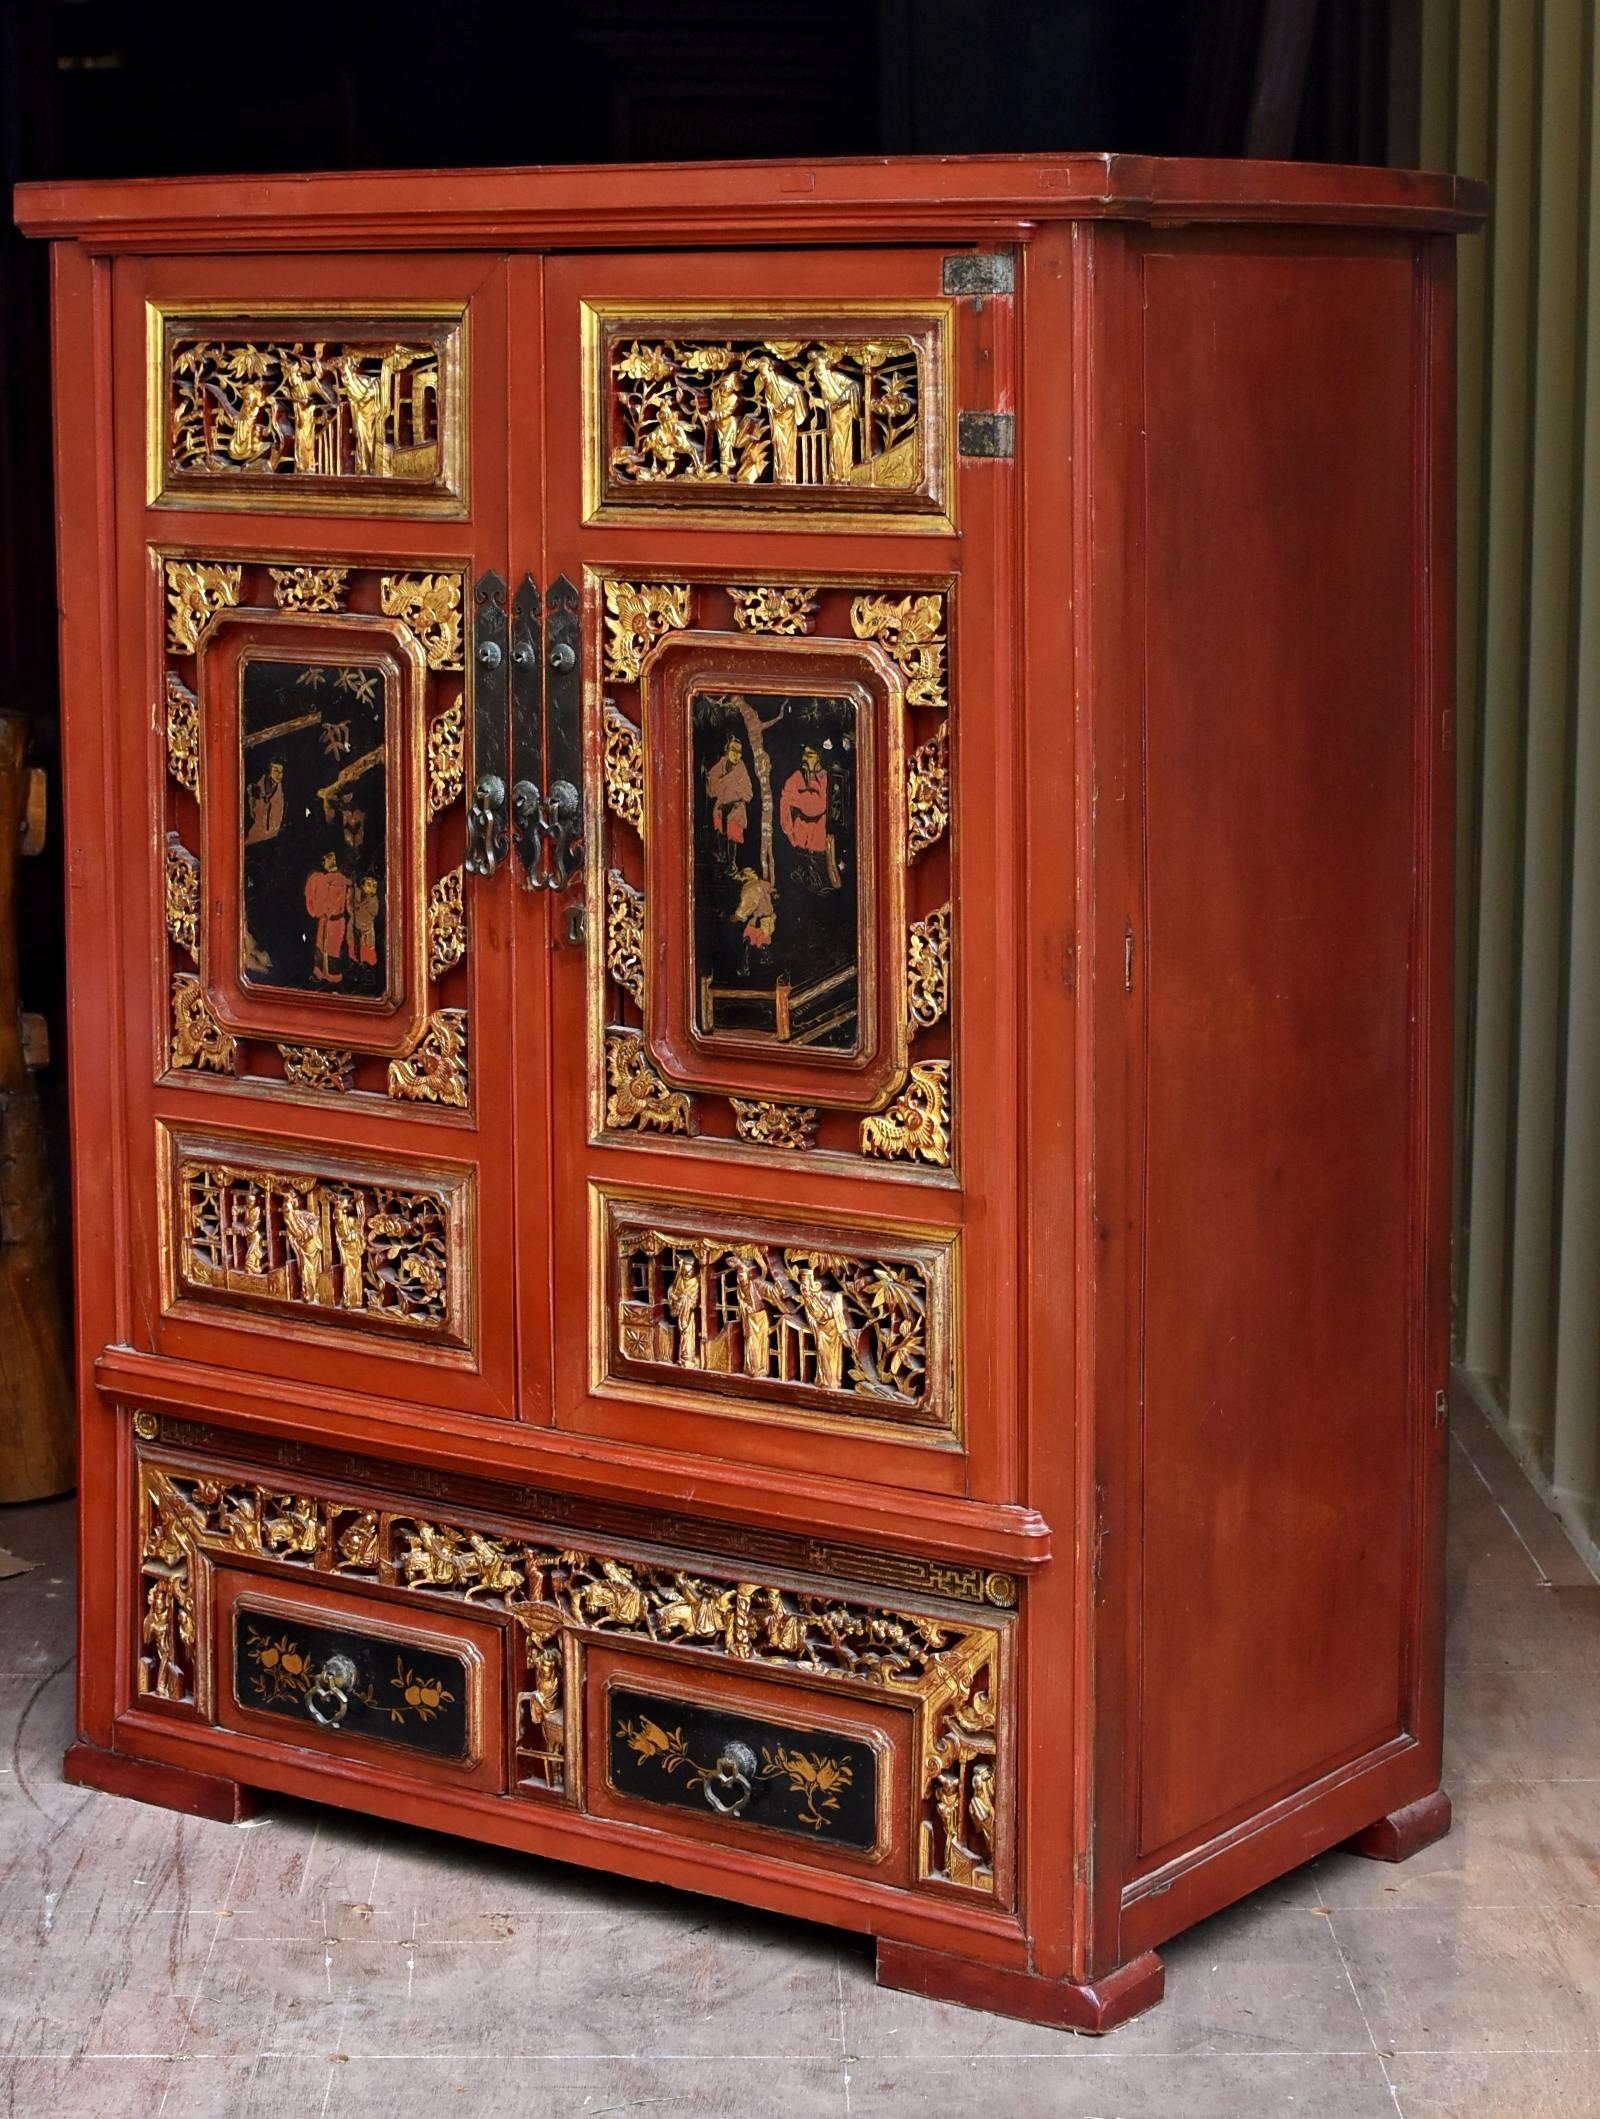 This rare, magnificent, fully carved, gilded cabinet was a scholar's treasure chest. hand-painted door panels depict the scholar's peaceful retirement life at the village. At one scene, he was tending to his garden while receiving a visitor. At